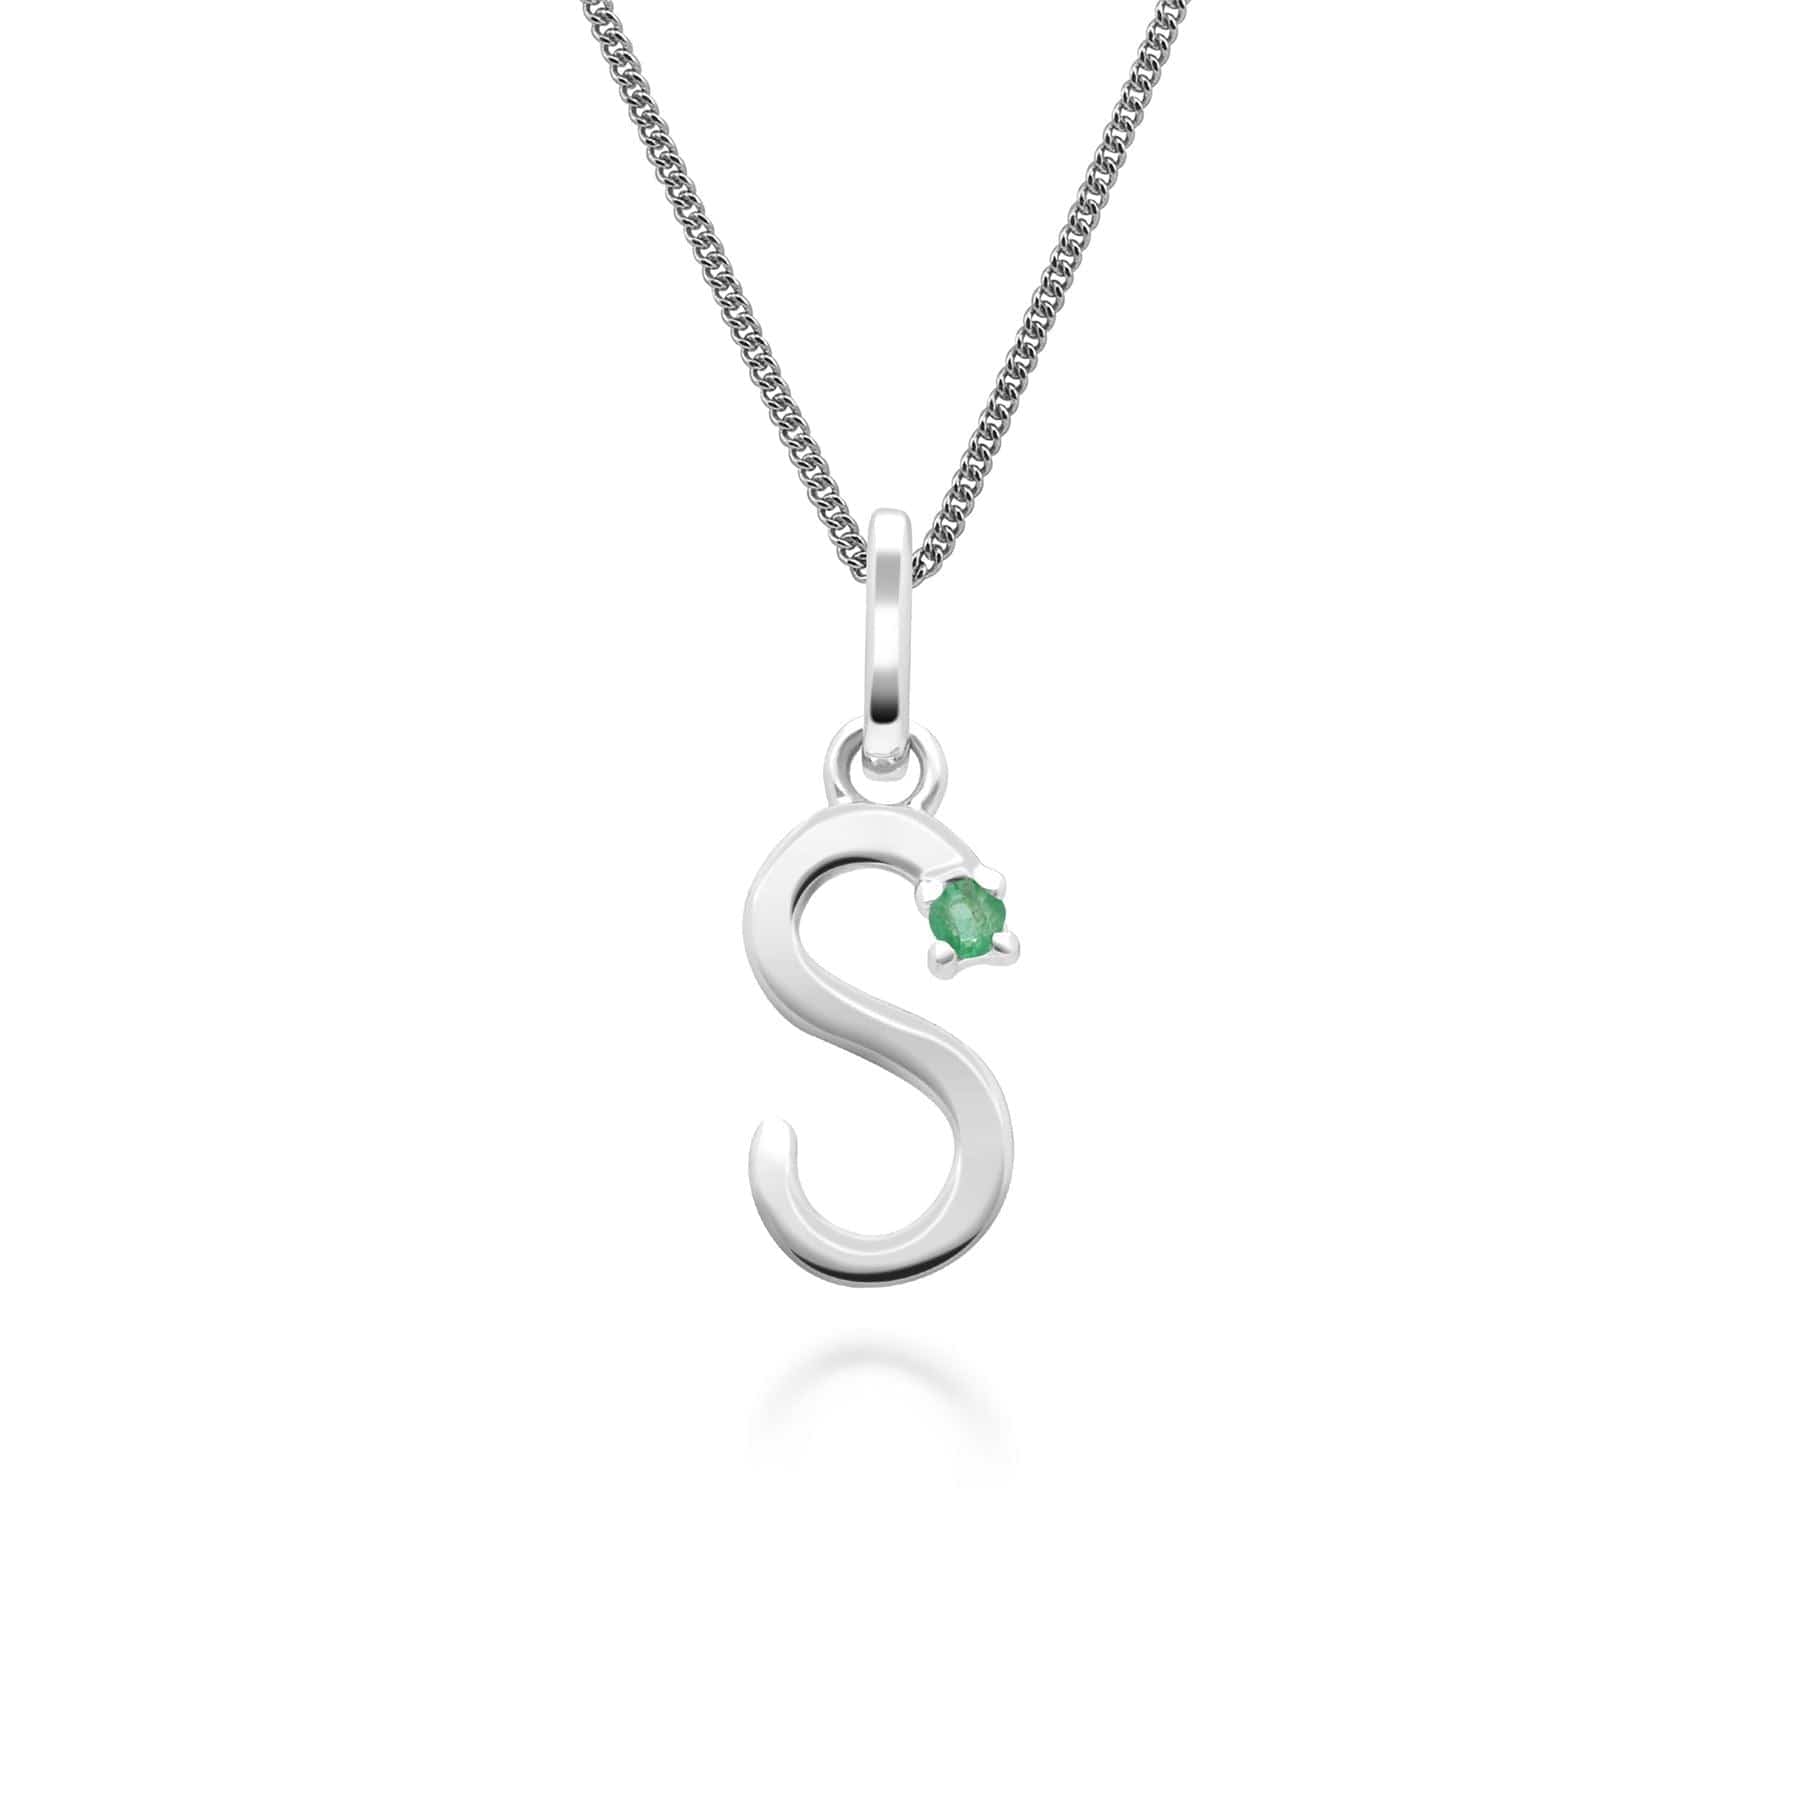 162P0253019 Initial Emerald Letter Charm Necklace in 9ct White Gold 17